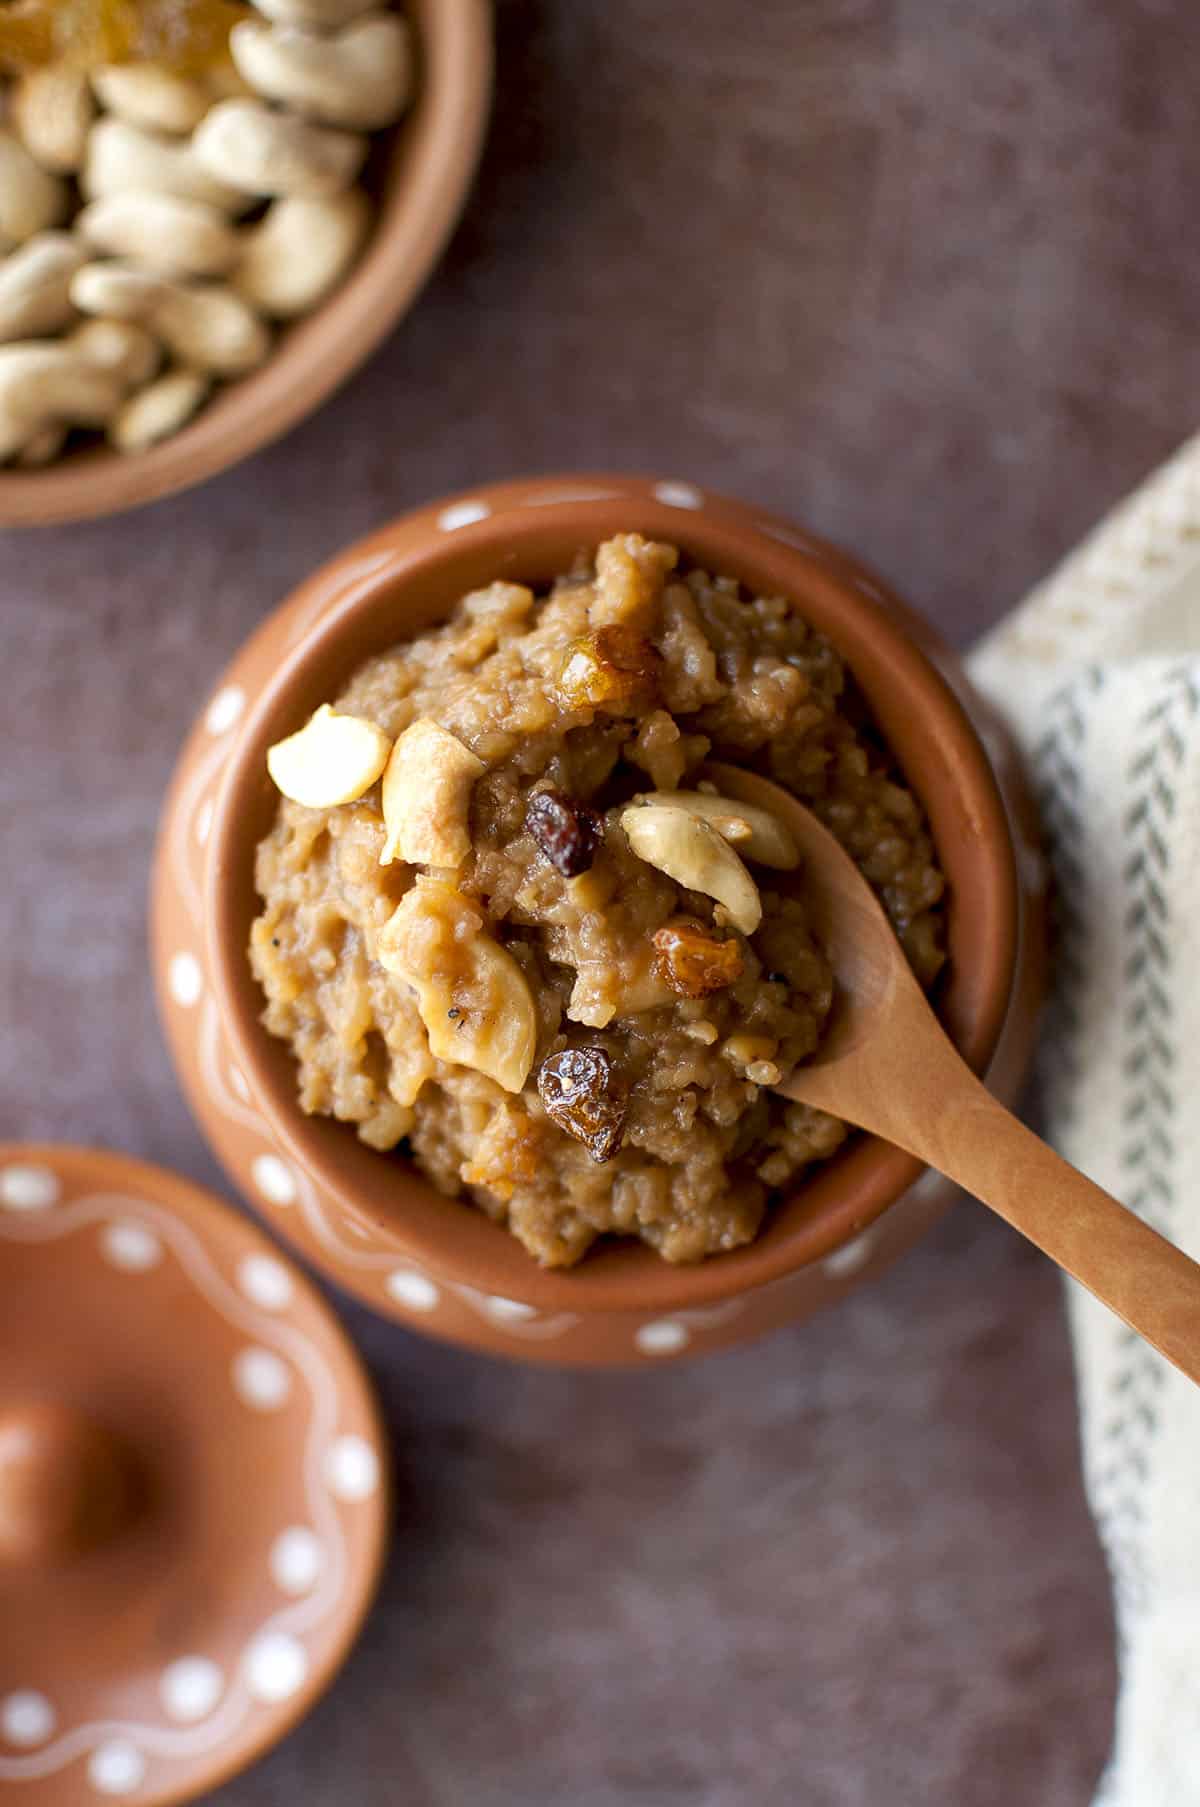 Terracotta pot with sweet pongal topped with raisins and cashews and a wooden spoon